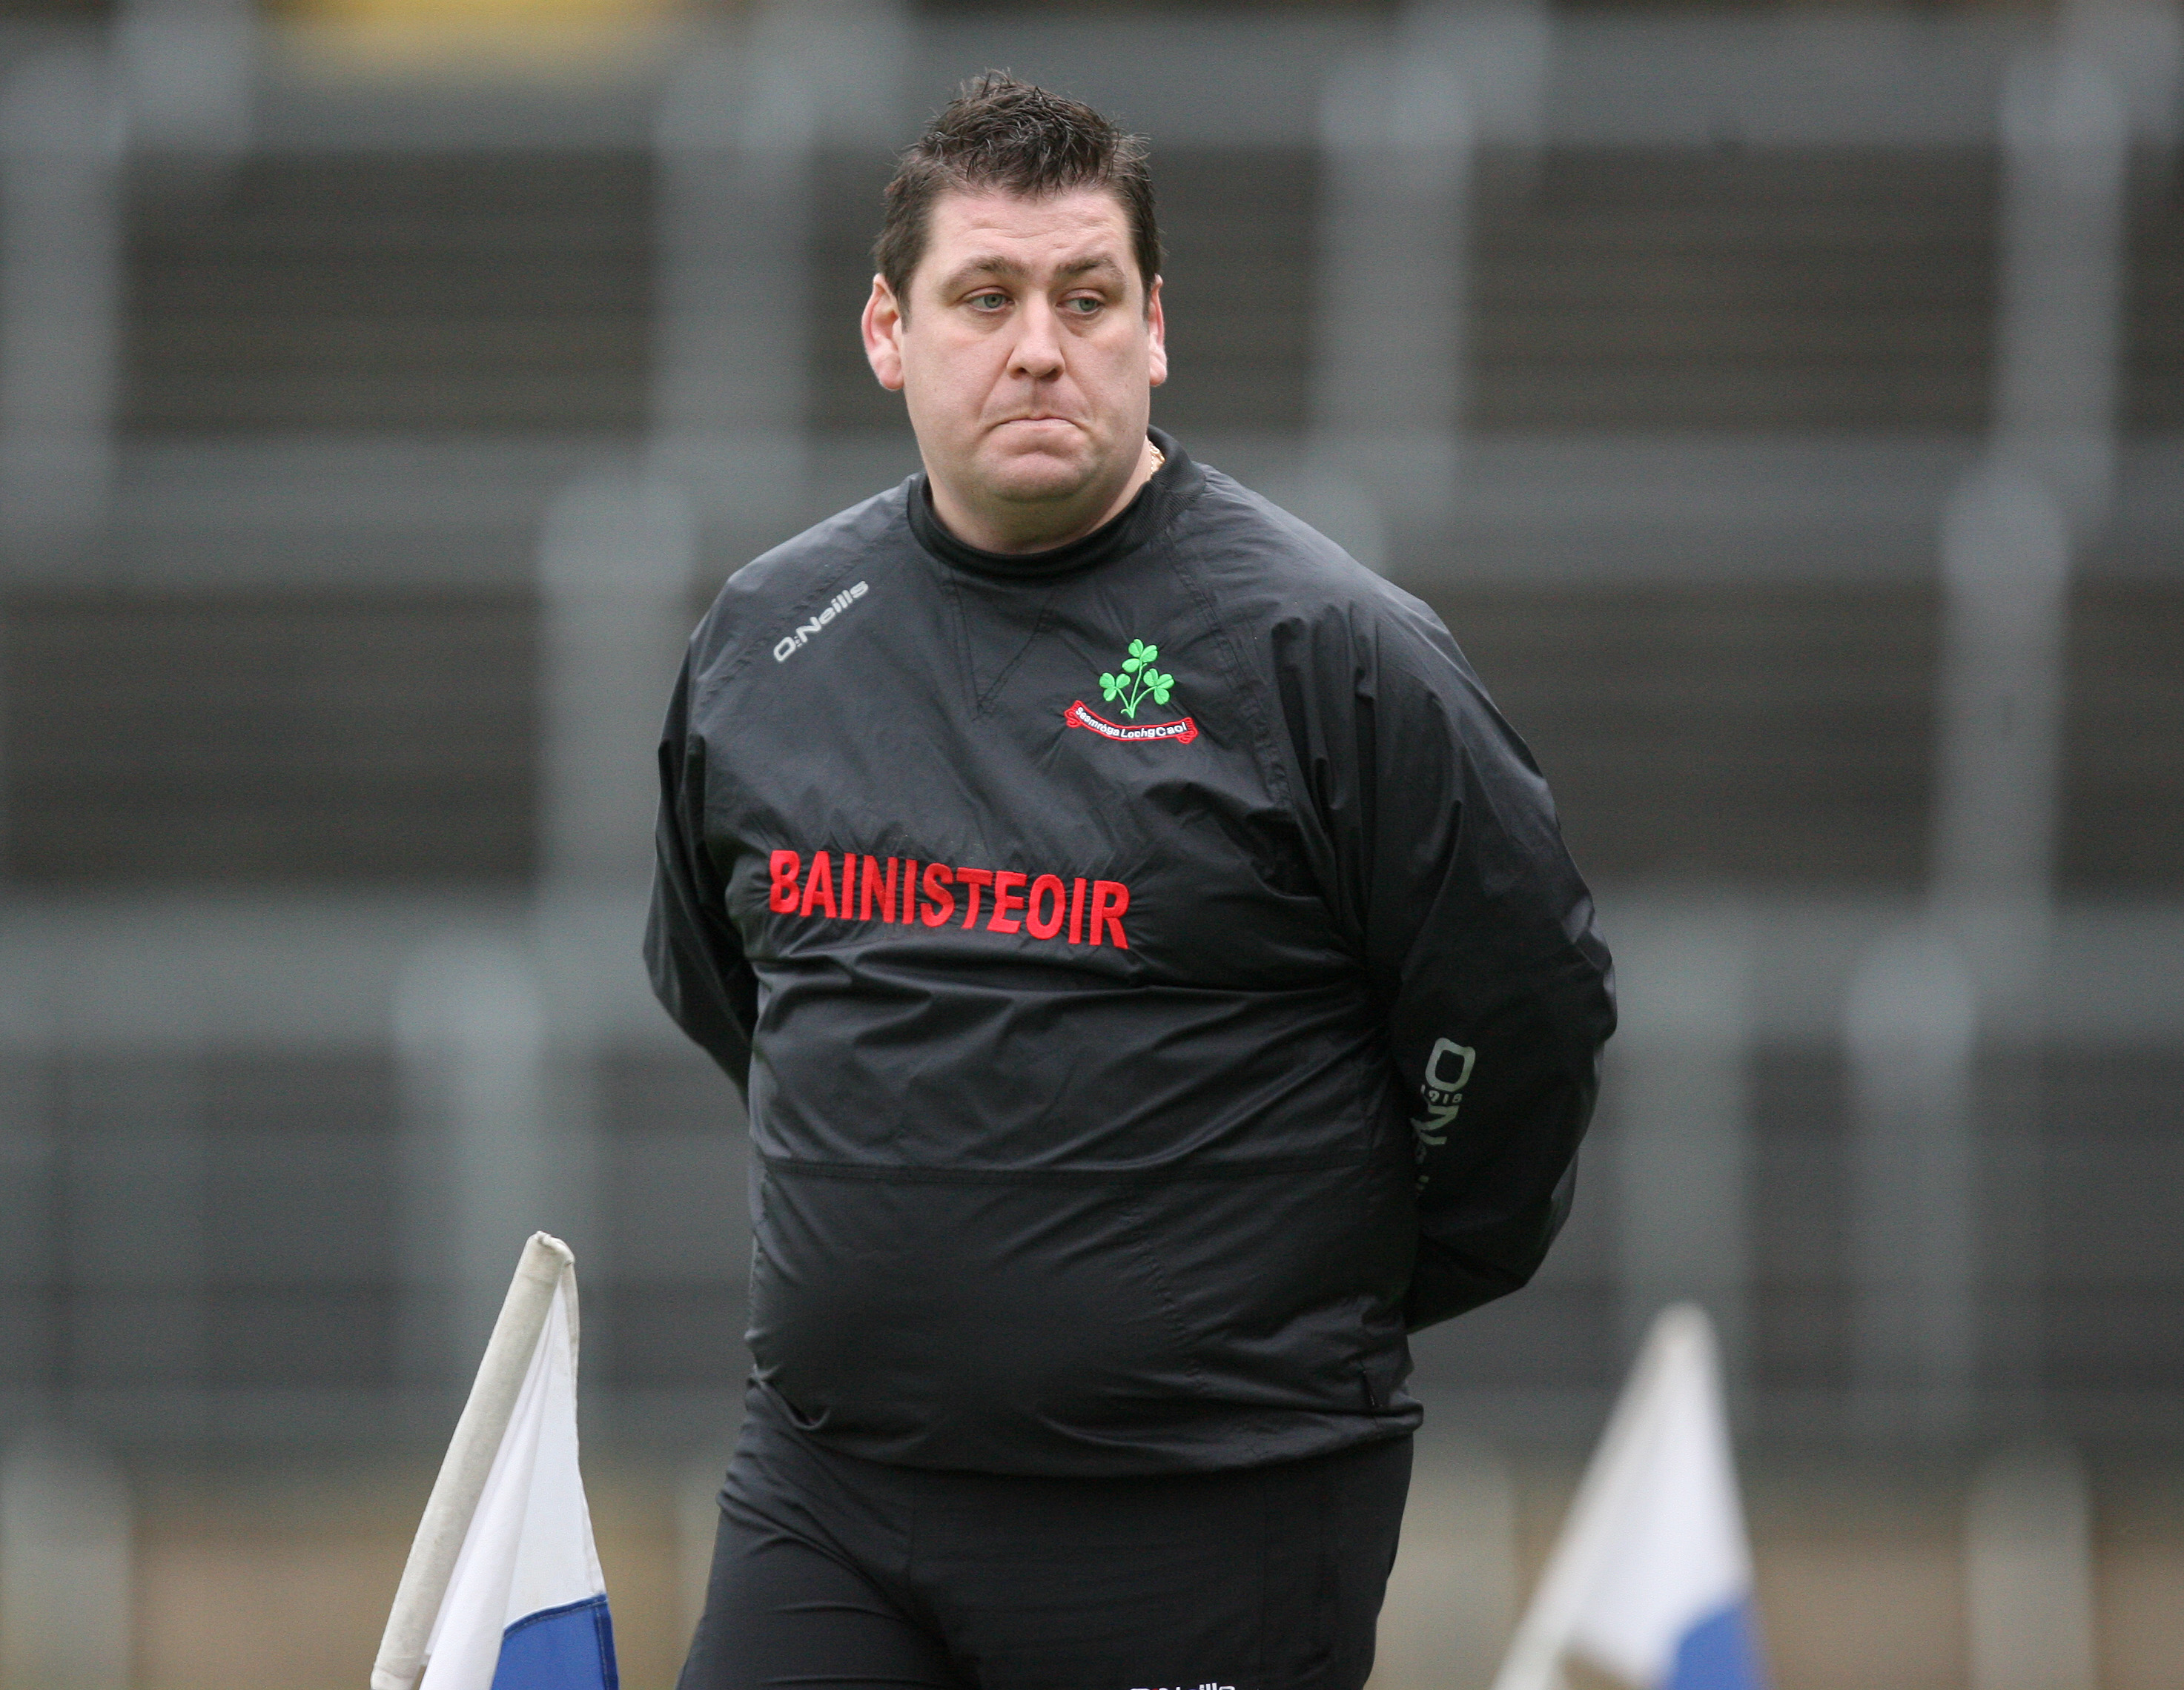 PJ O’Mullan enjoyed a largely successful spell as Loughgiel Shamrocks boss – his first task will be to lead Antrim back into Division 1B